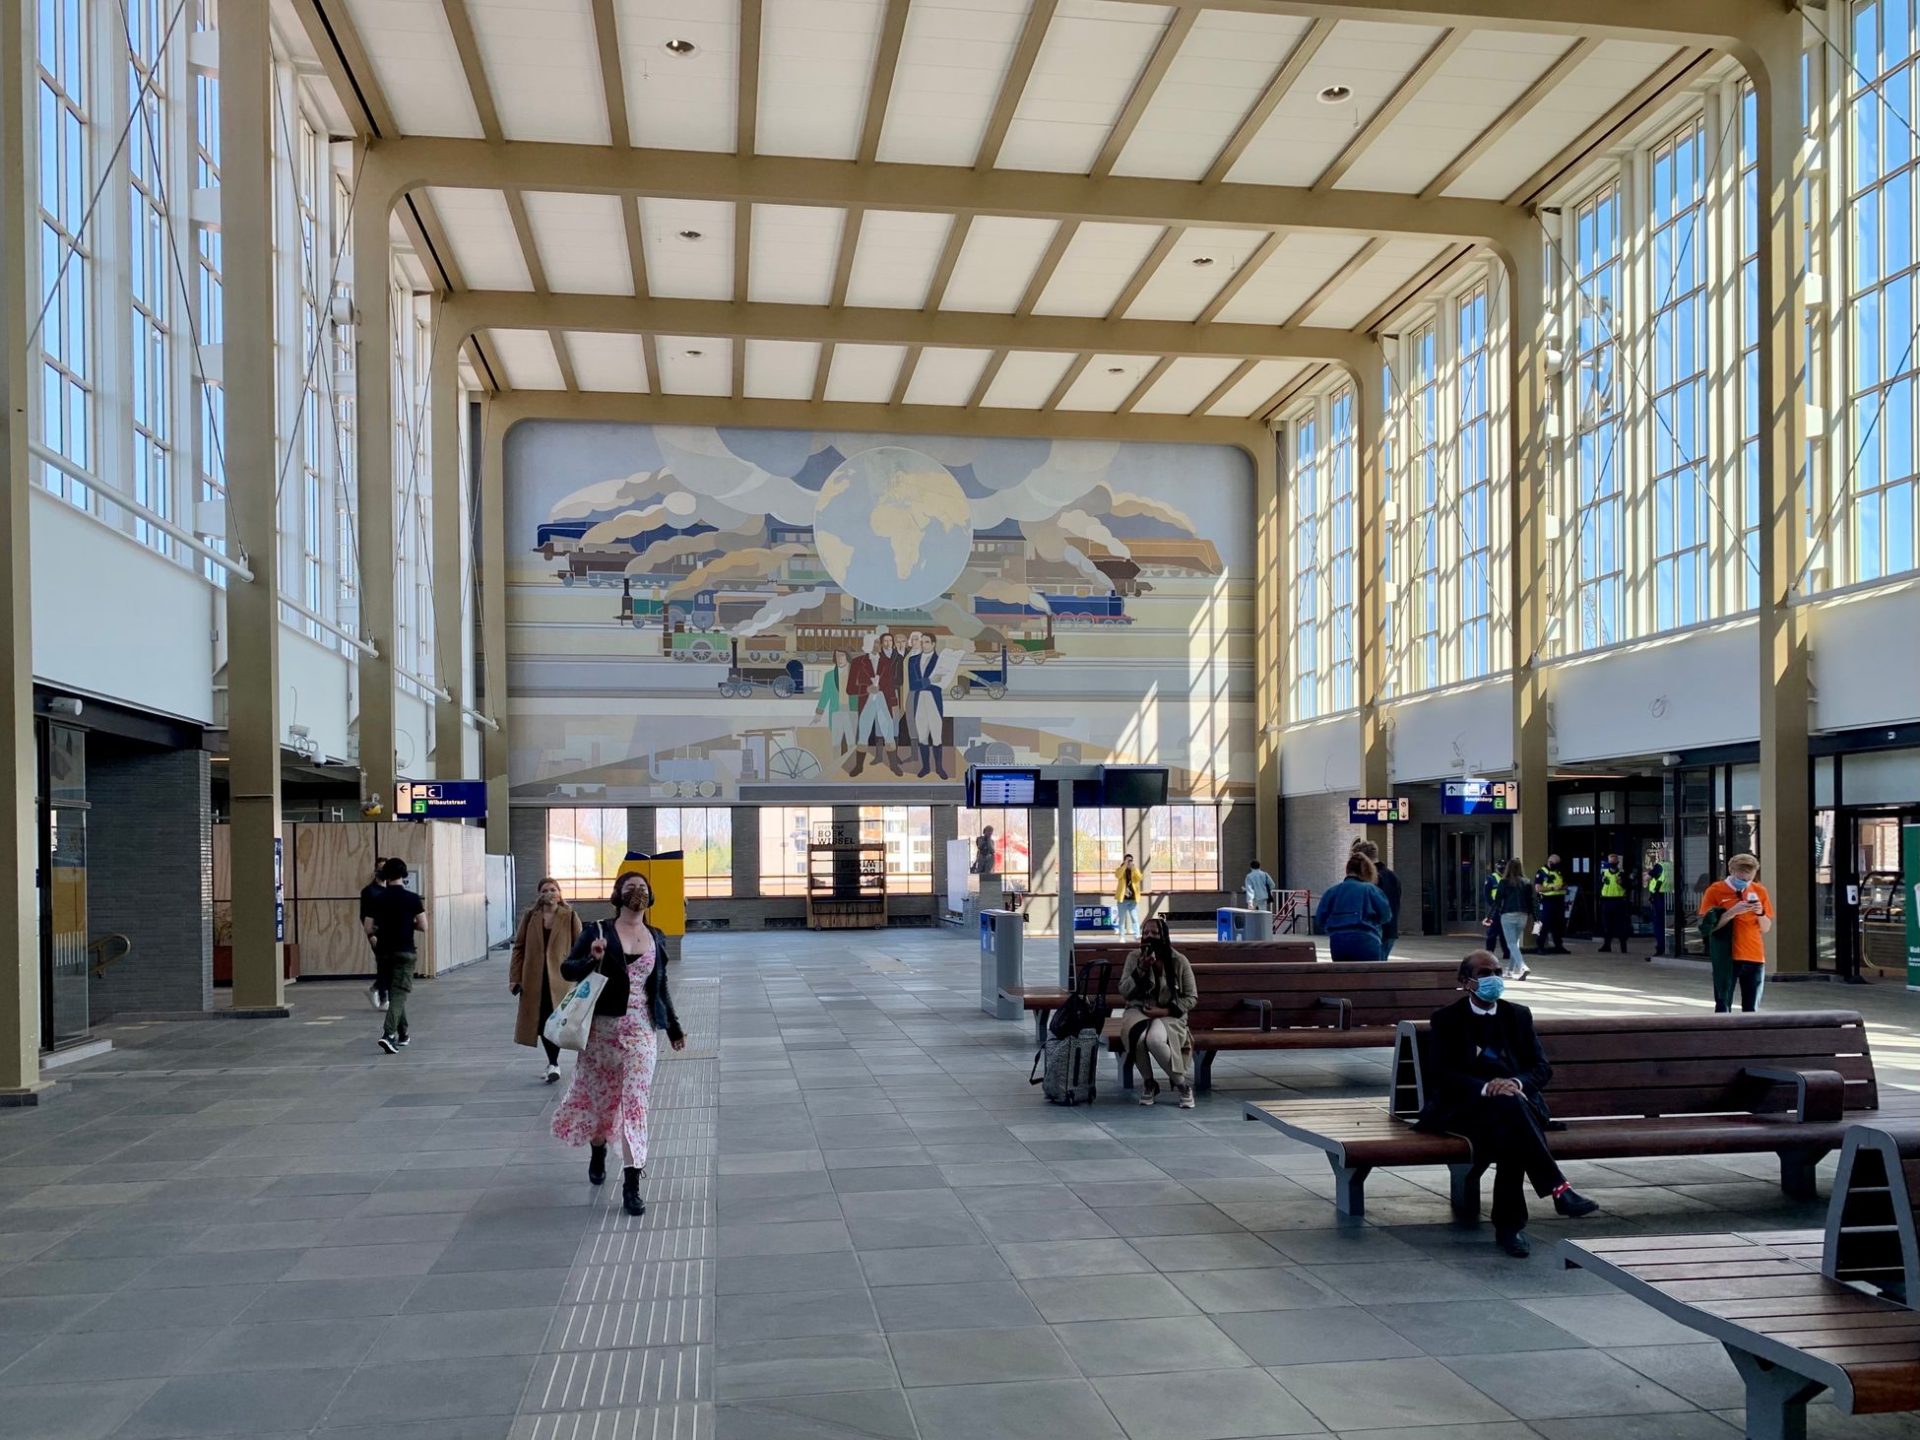 The east side of the main hall with wall painting by Peter Alma. Photo by: ©Anneke Bokern / architour